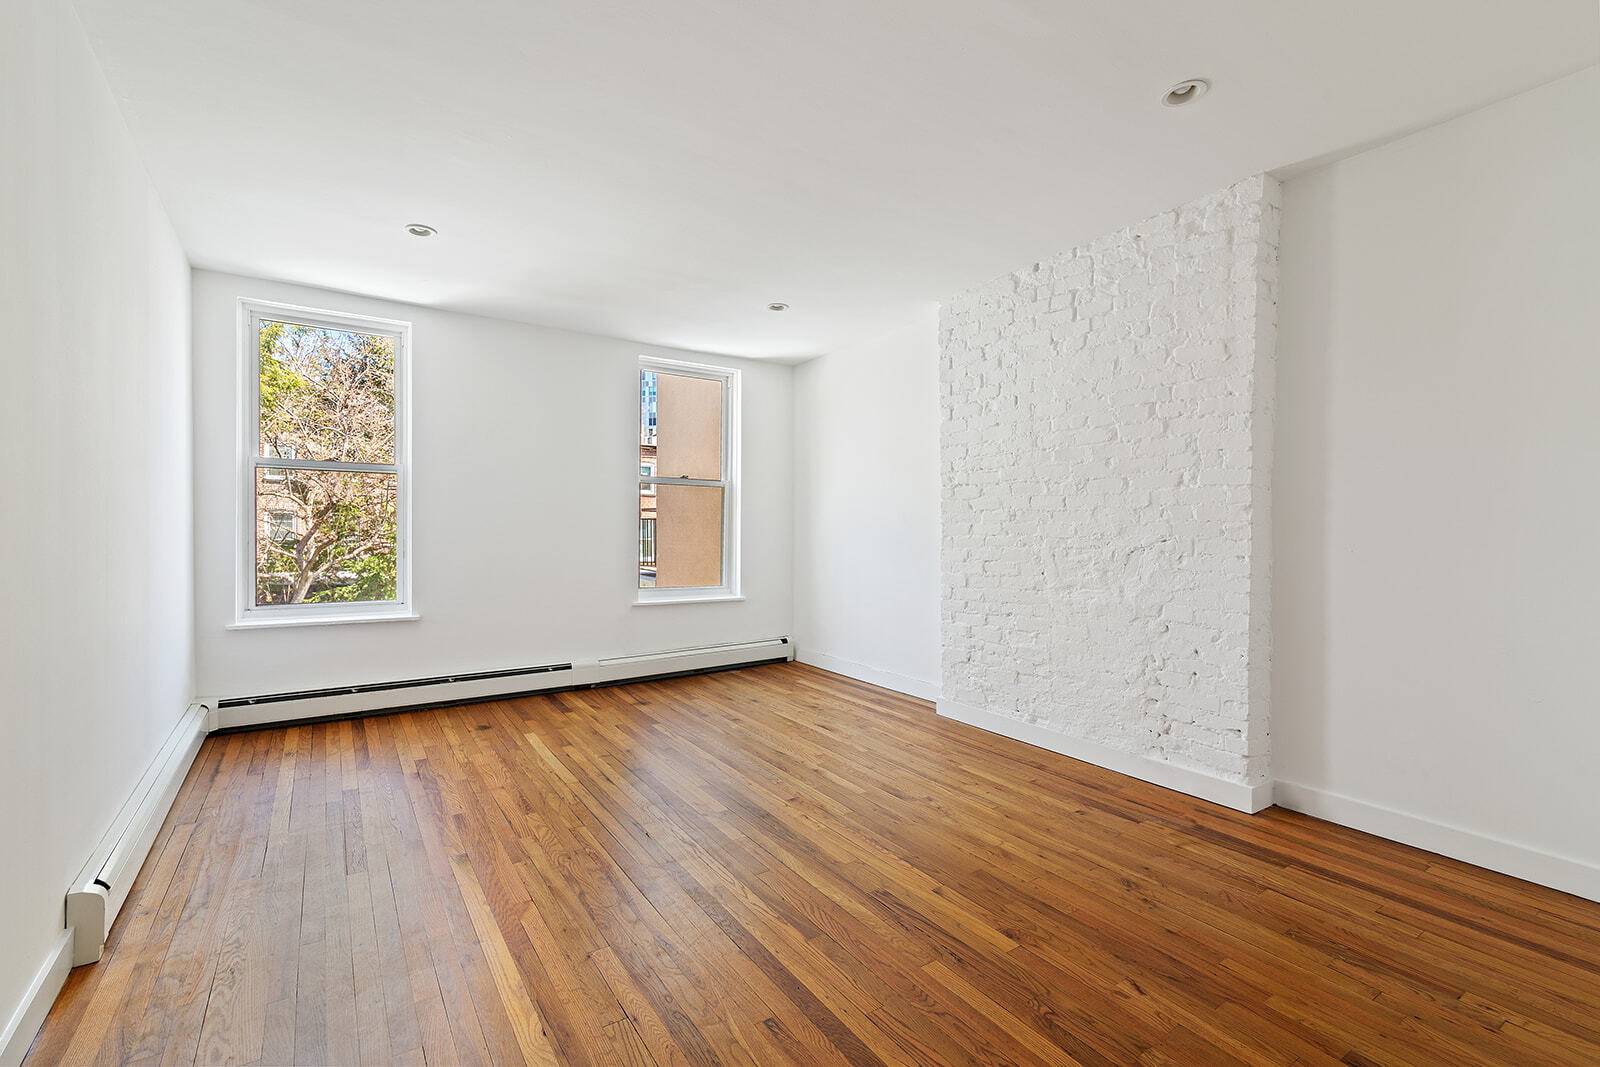 This cozy 1 bedroom apartment has gleaming hardwood floors, nearly 10' ceilings and ample closet space.